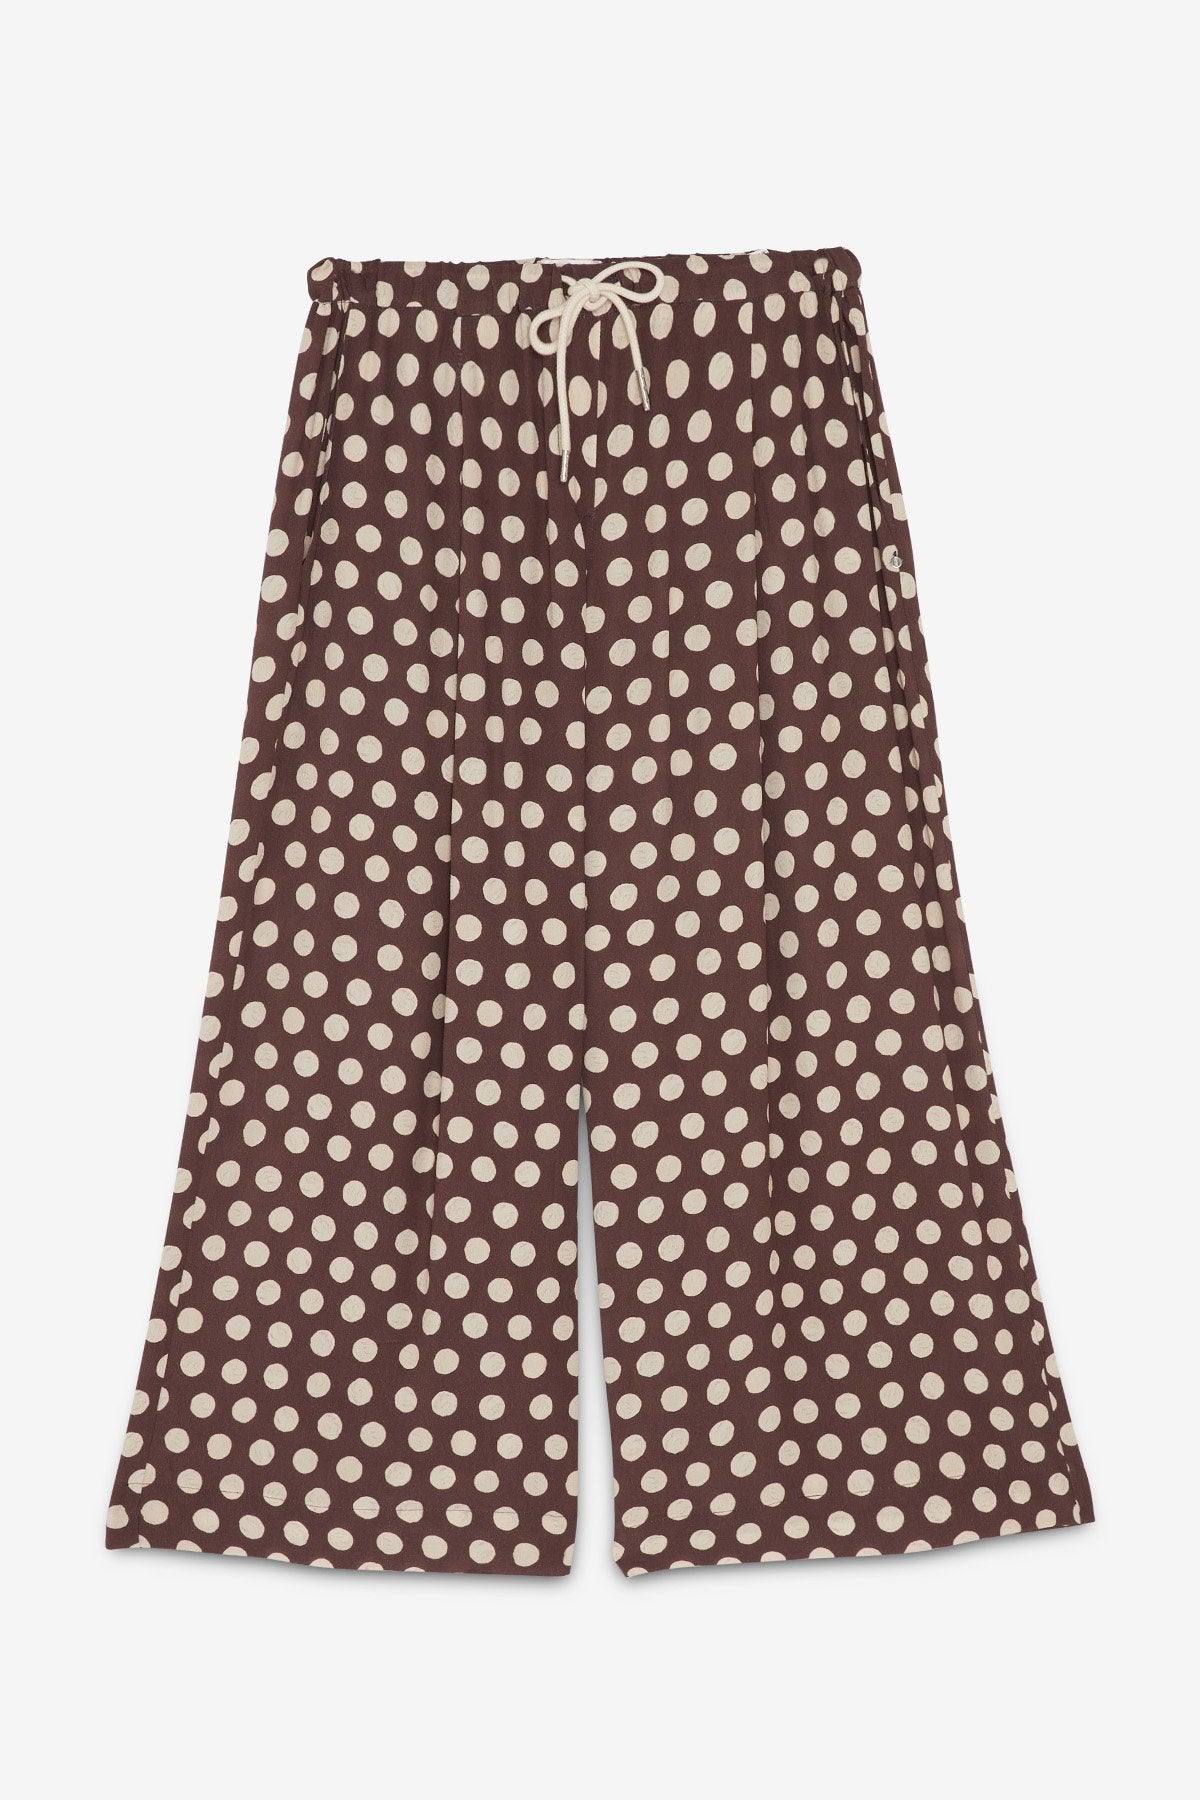 Ottod'Ame Polka Dots' Culottes Trousers